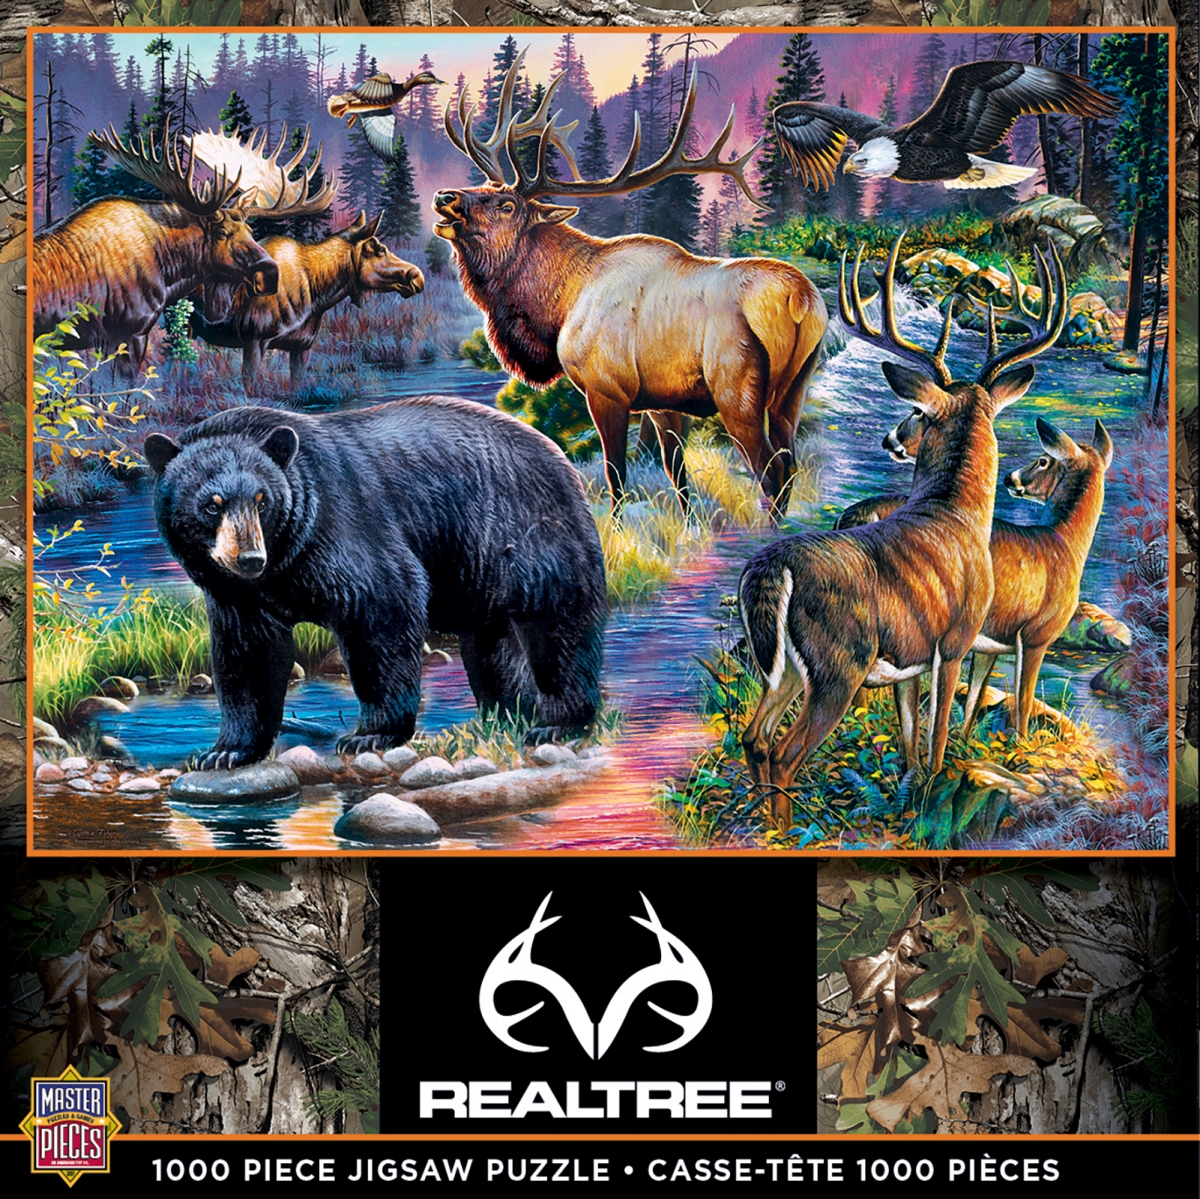 MasterPieces 71940 19.25 x 26.75 in. Realtree Wild Living Jigsaw Puzzle - 1000 Piece